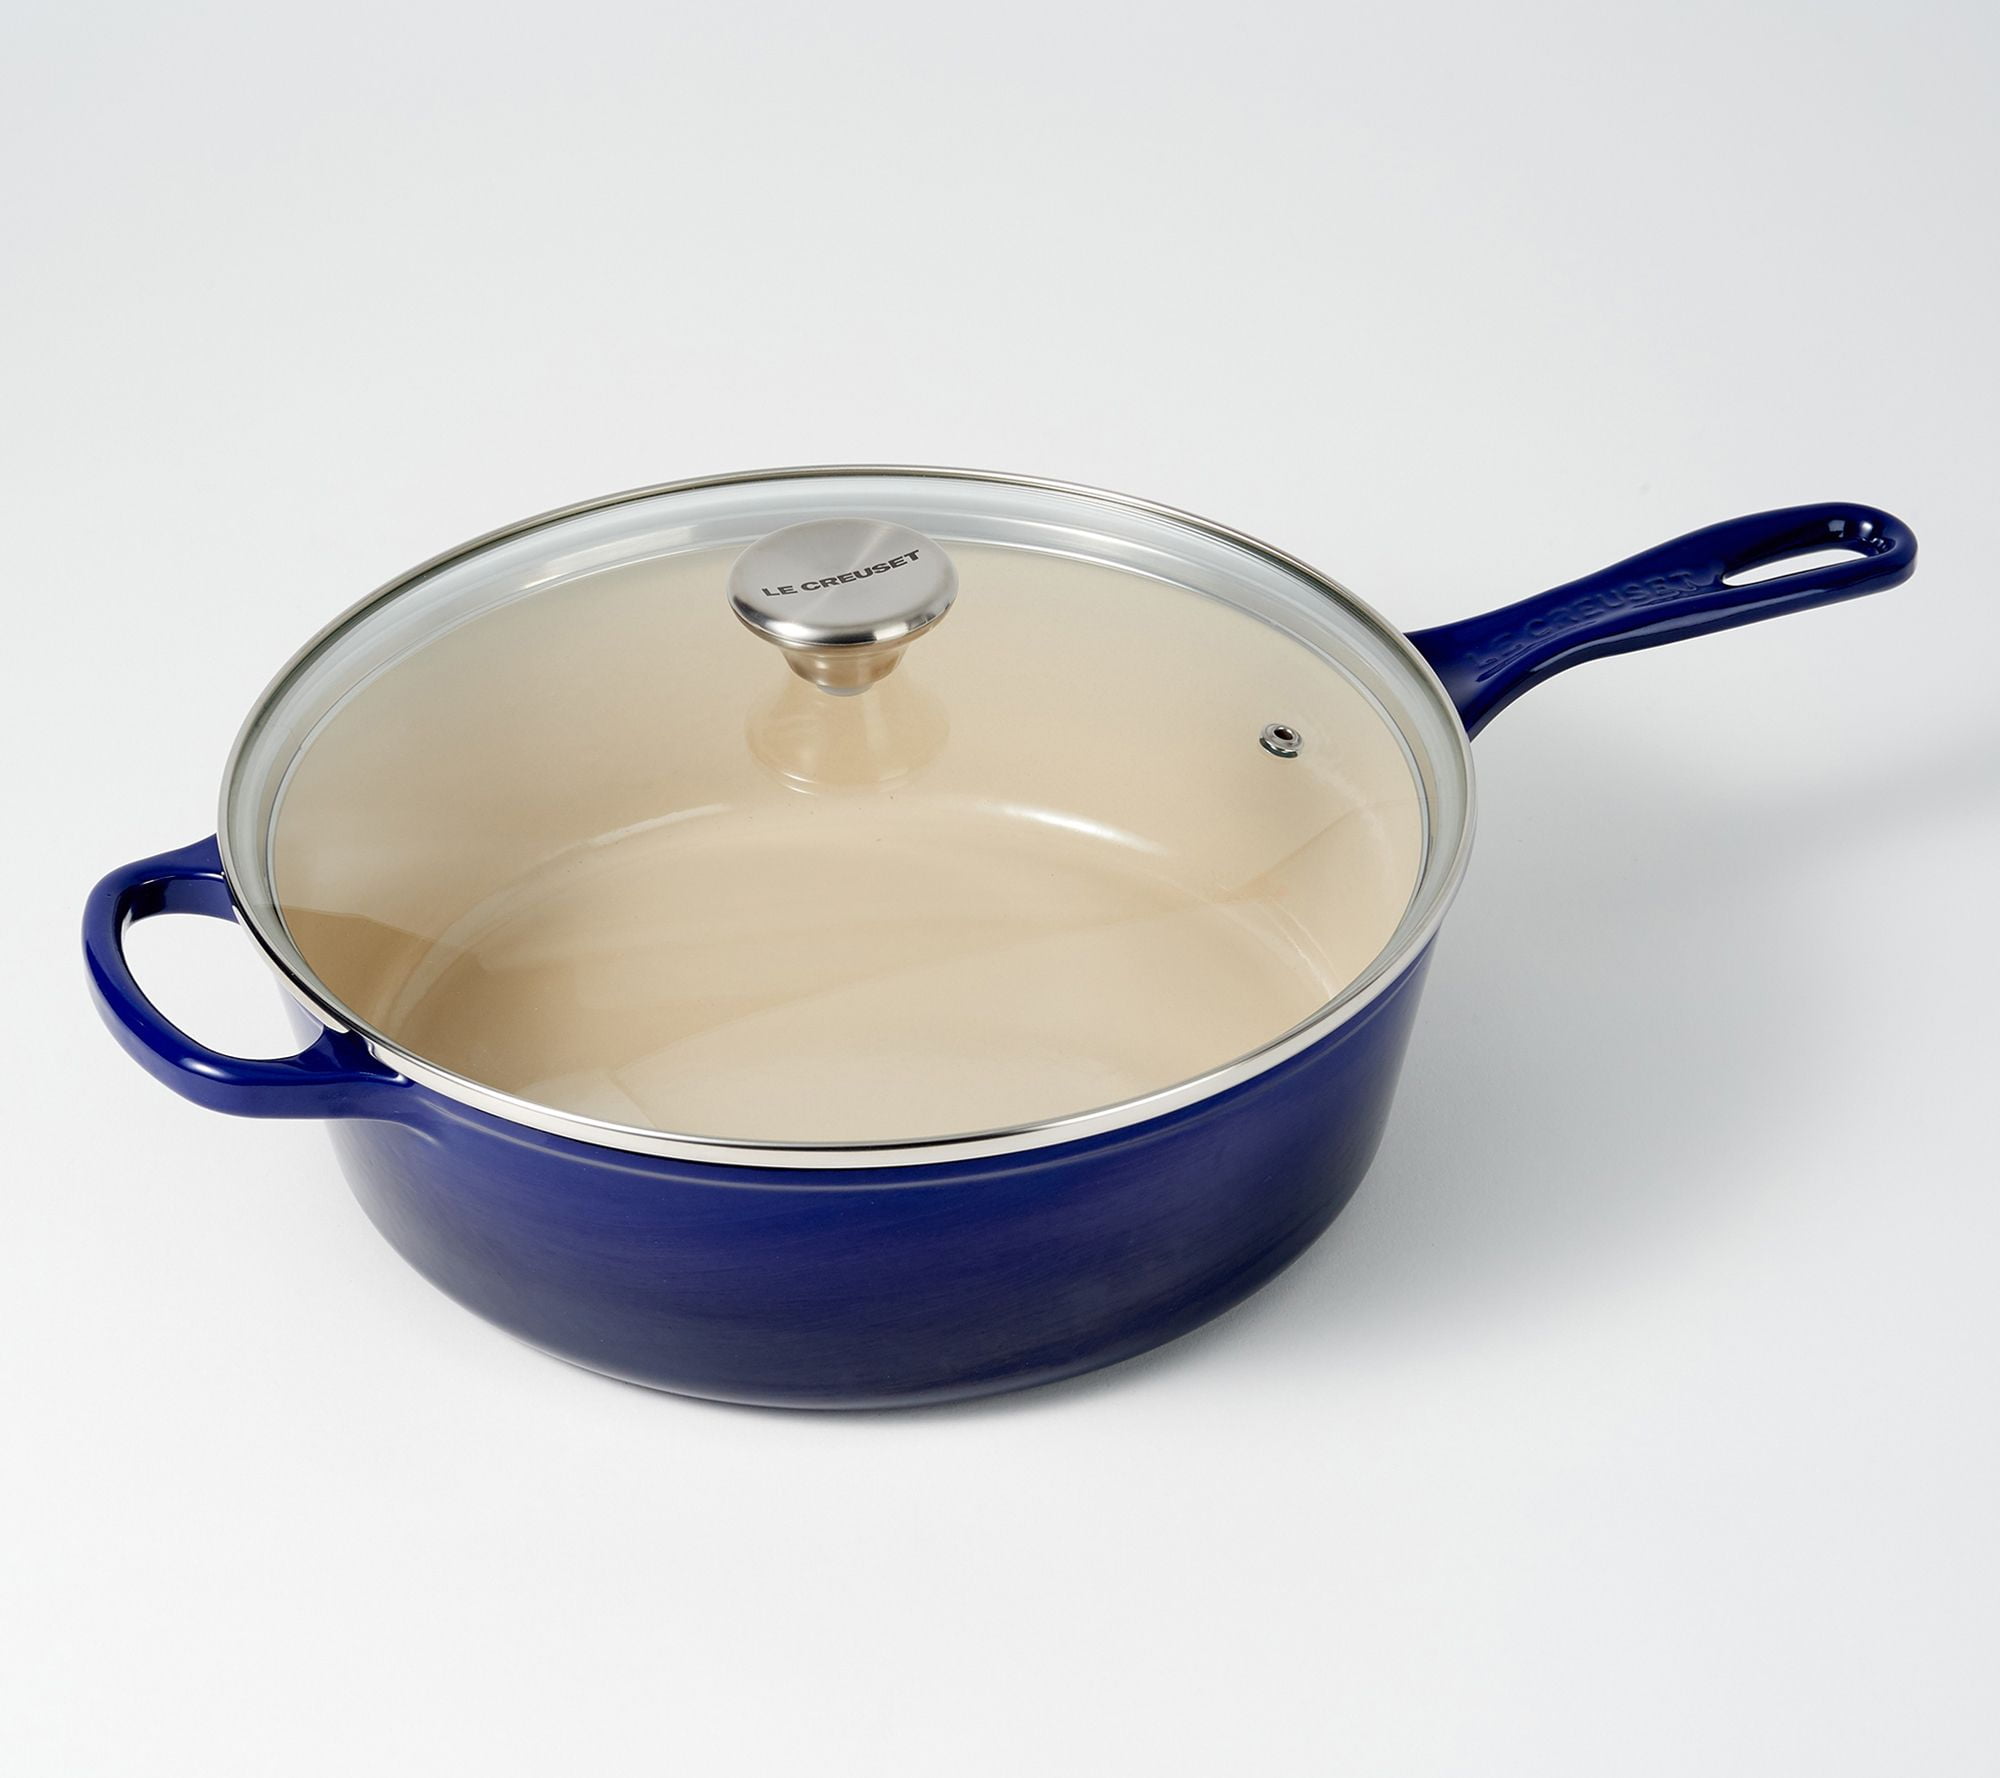 Every single item in the Le Creuset Indigo collection is on sale